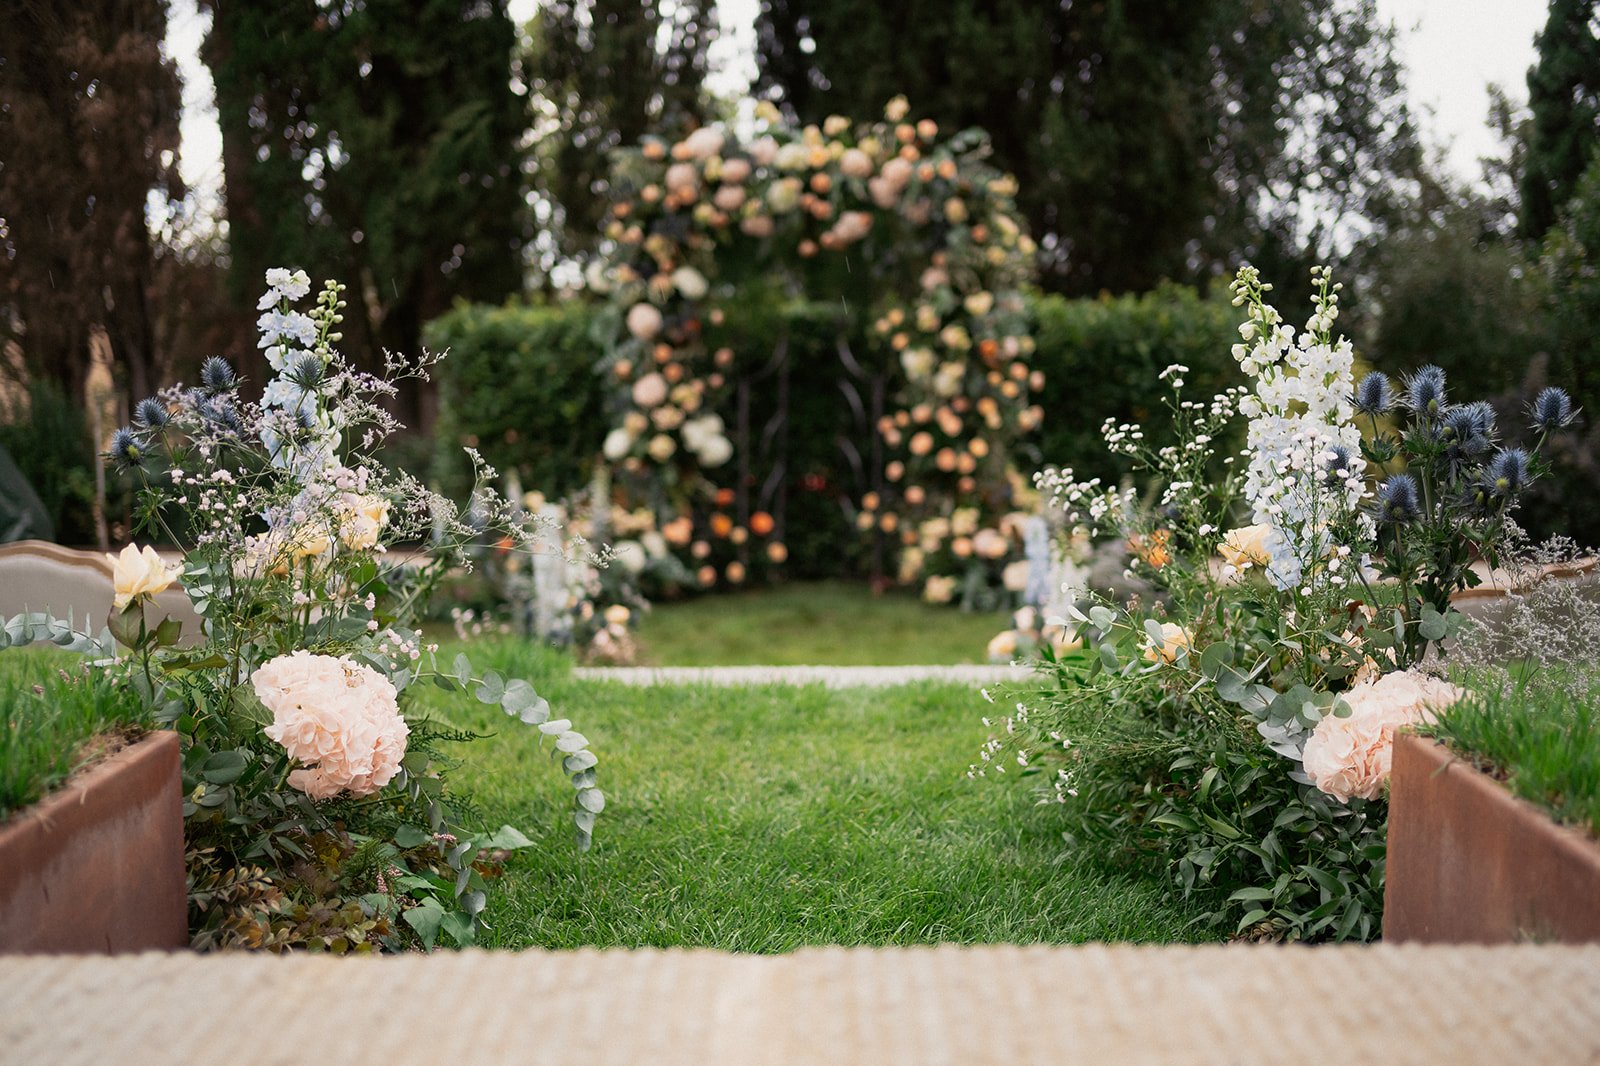 John_Pete_wedding ceremony arch with Tuscan cypresses in the background.jpg